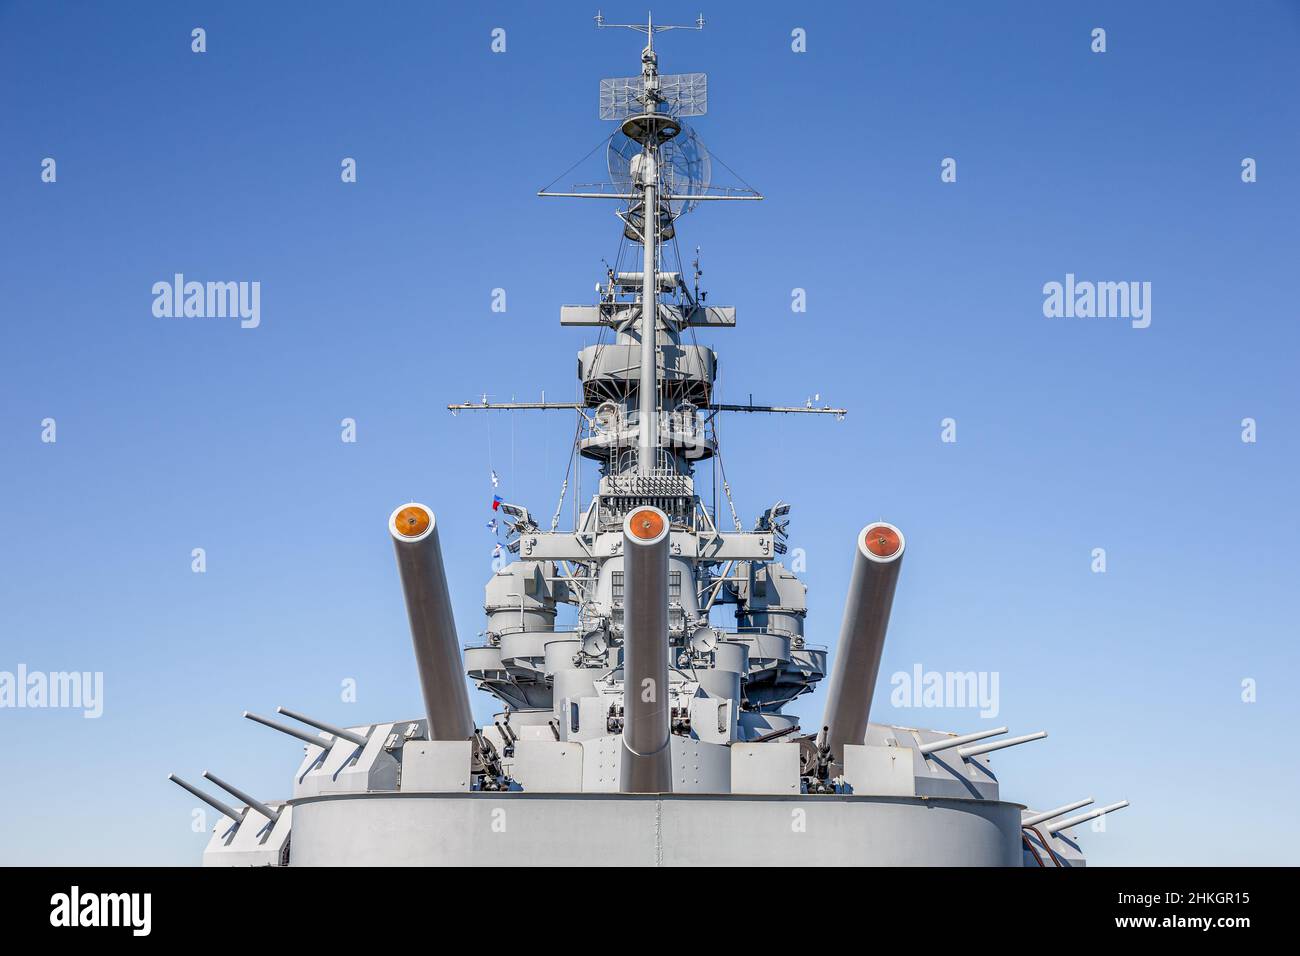 Rear guns of the USS Alabama (BB-60), a battleship that served in World War II.  Concepts could include history, war, defense, navy, other. Stock Photo